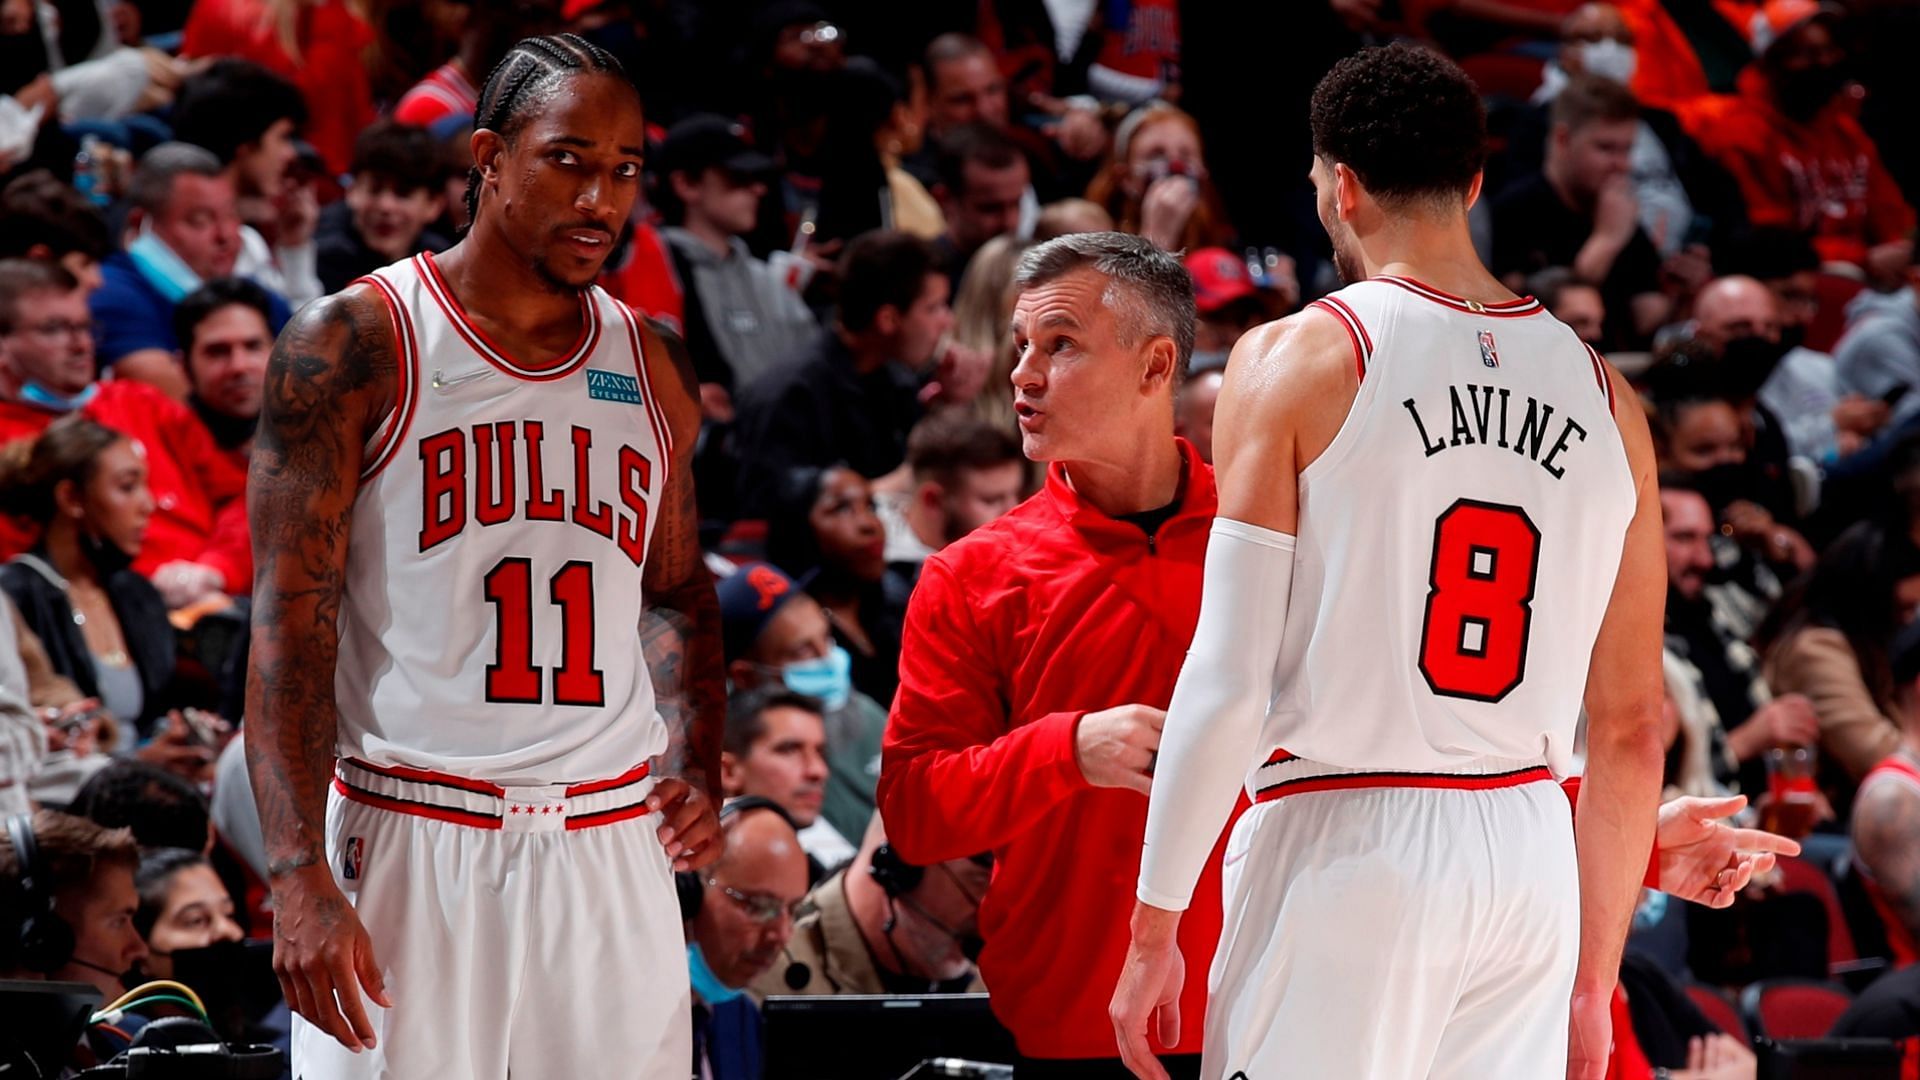 Head coach Billy Donovan could have his All-Star backcourt in the end. [Photo: Sporting News]